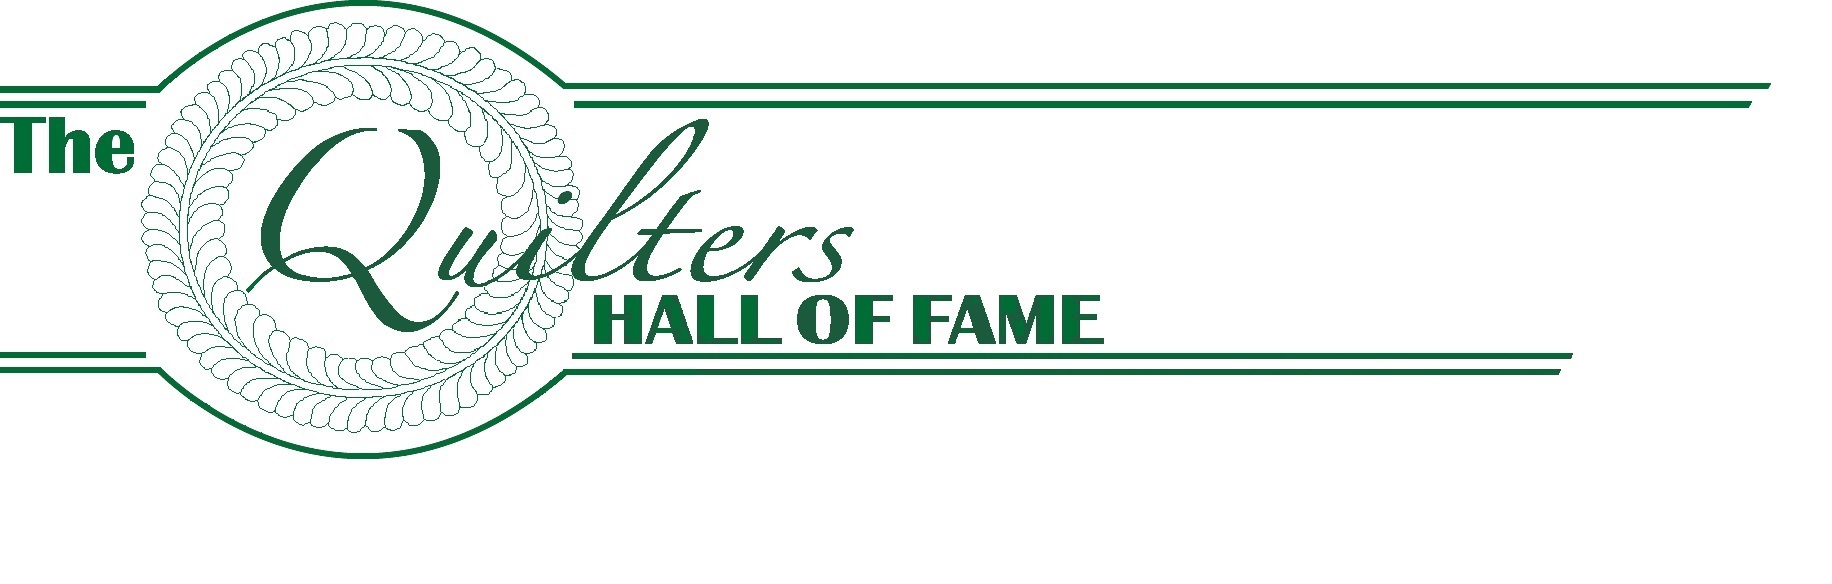 Quilters Hall of Fame Logo